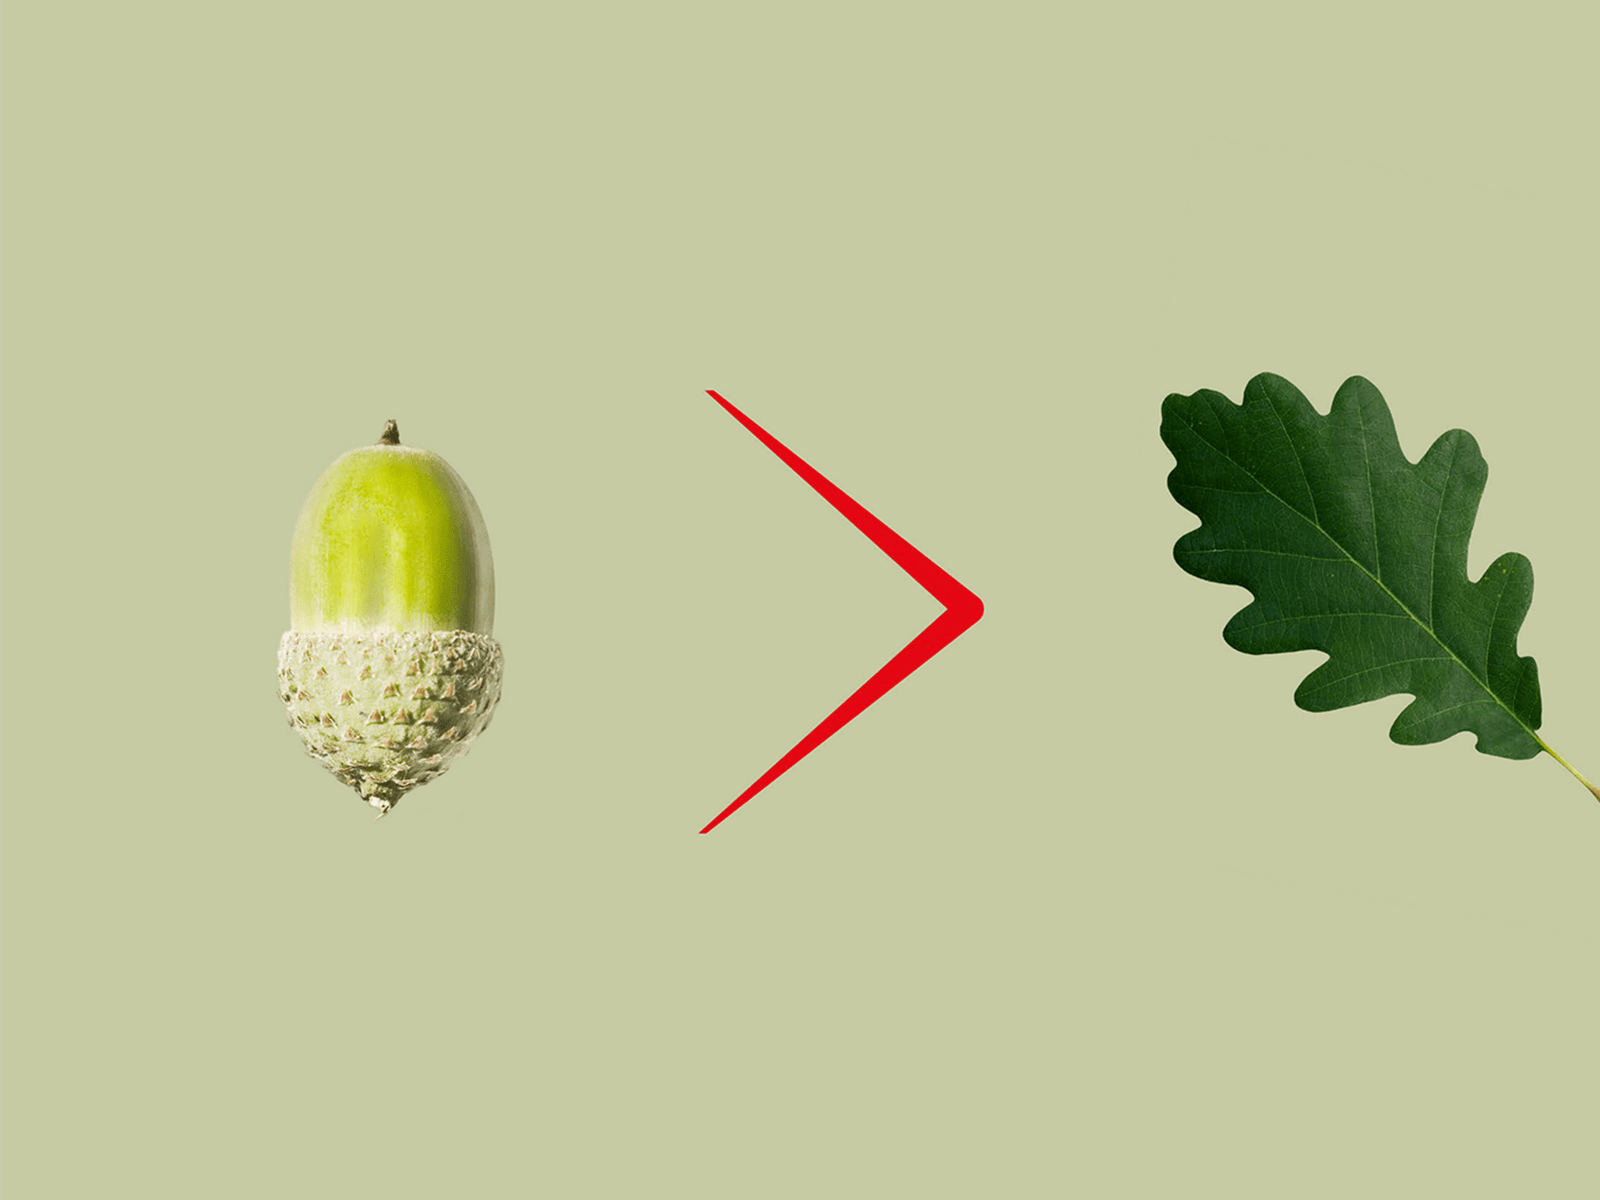 Arrow pointing from an acorn to oak tree leaf